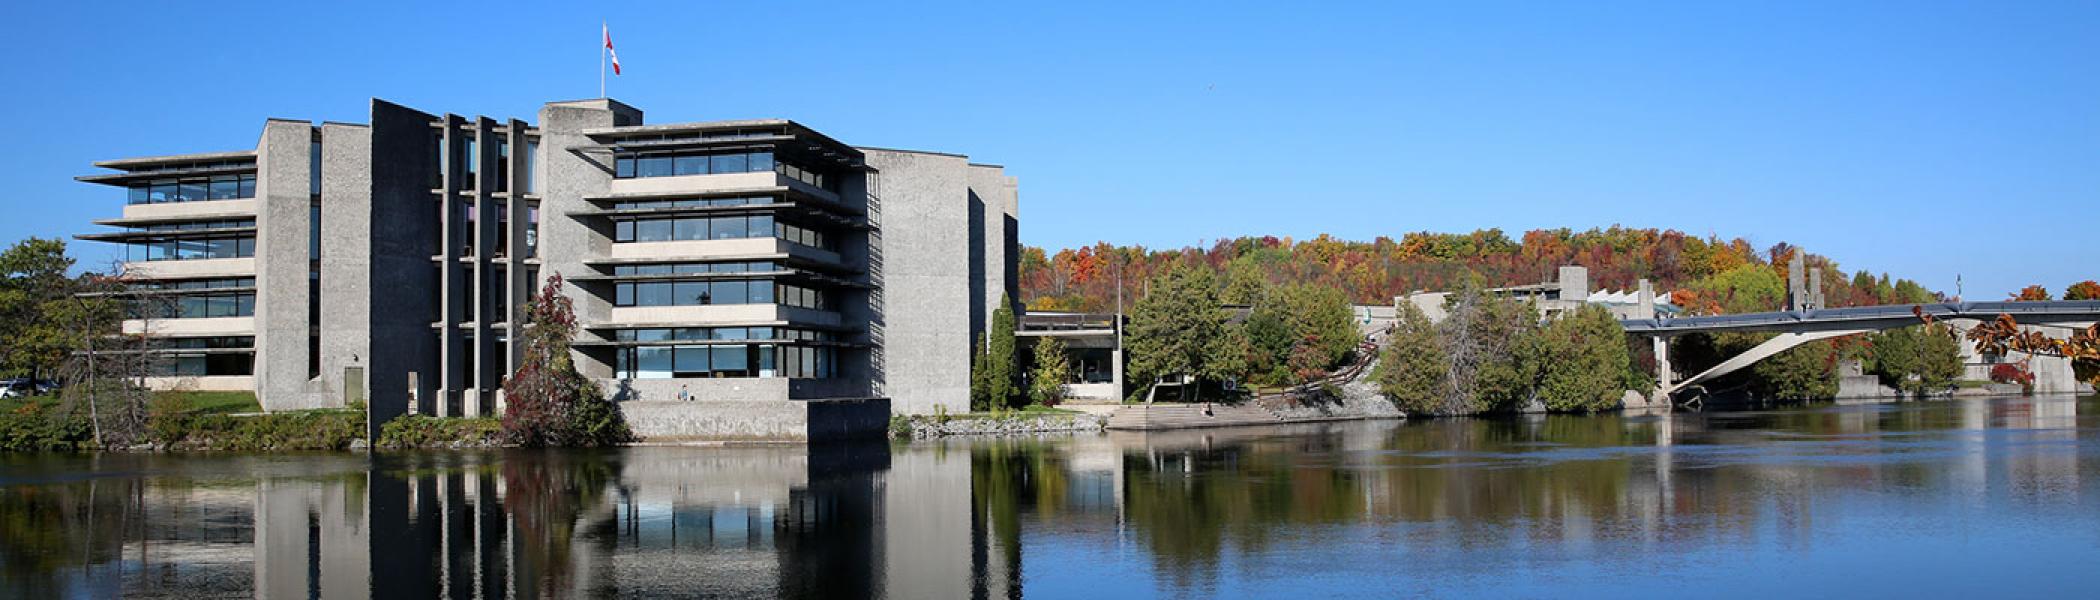 Bata library across the river on a sunny day